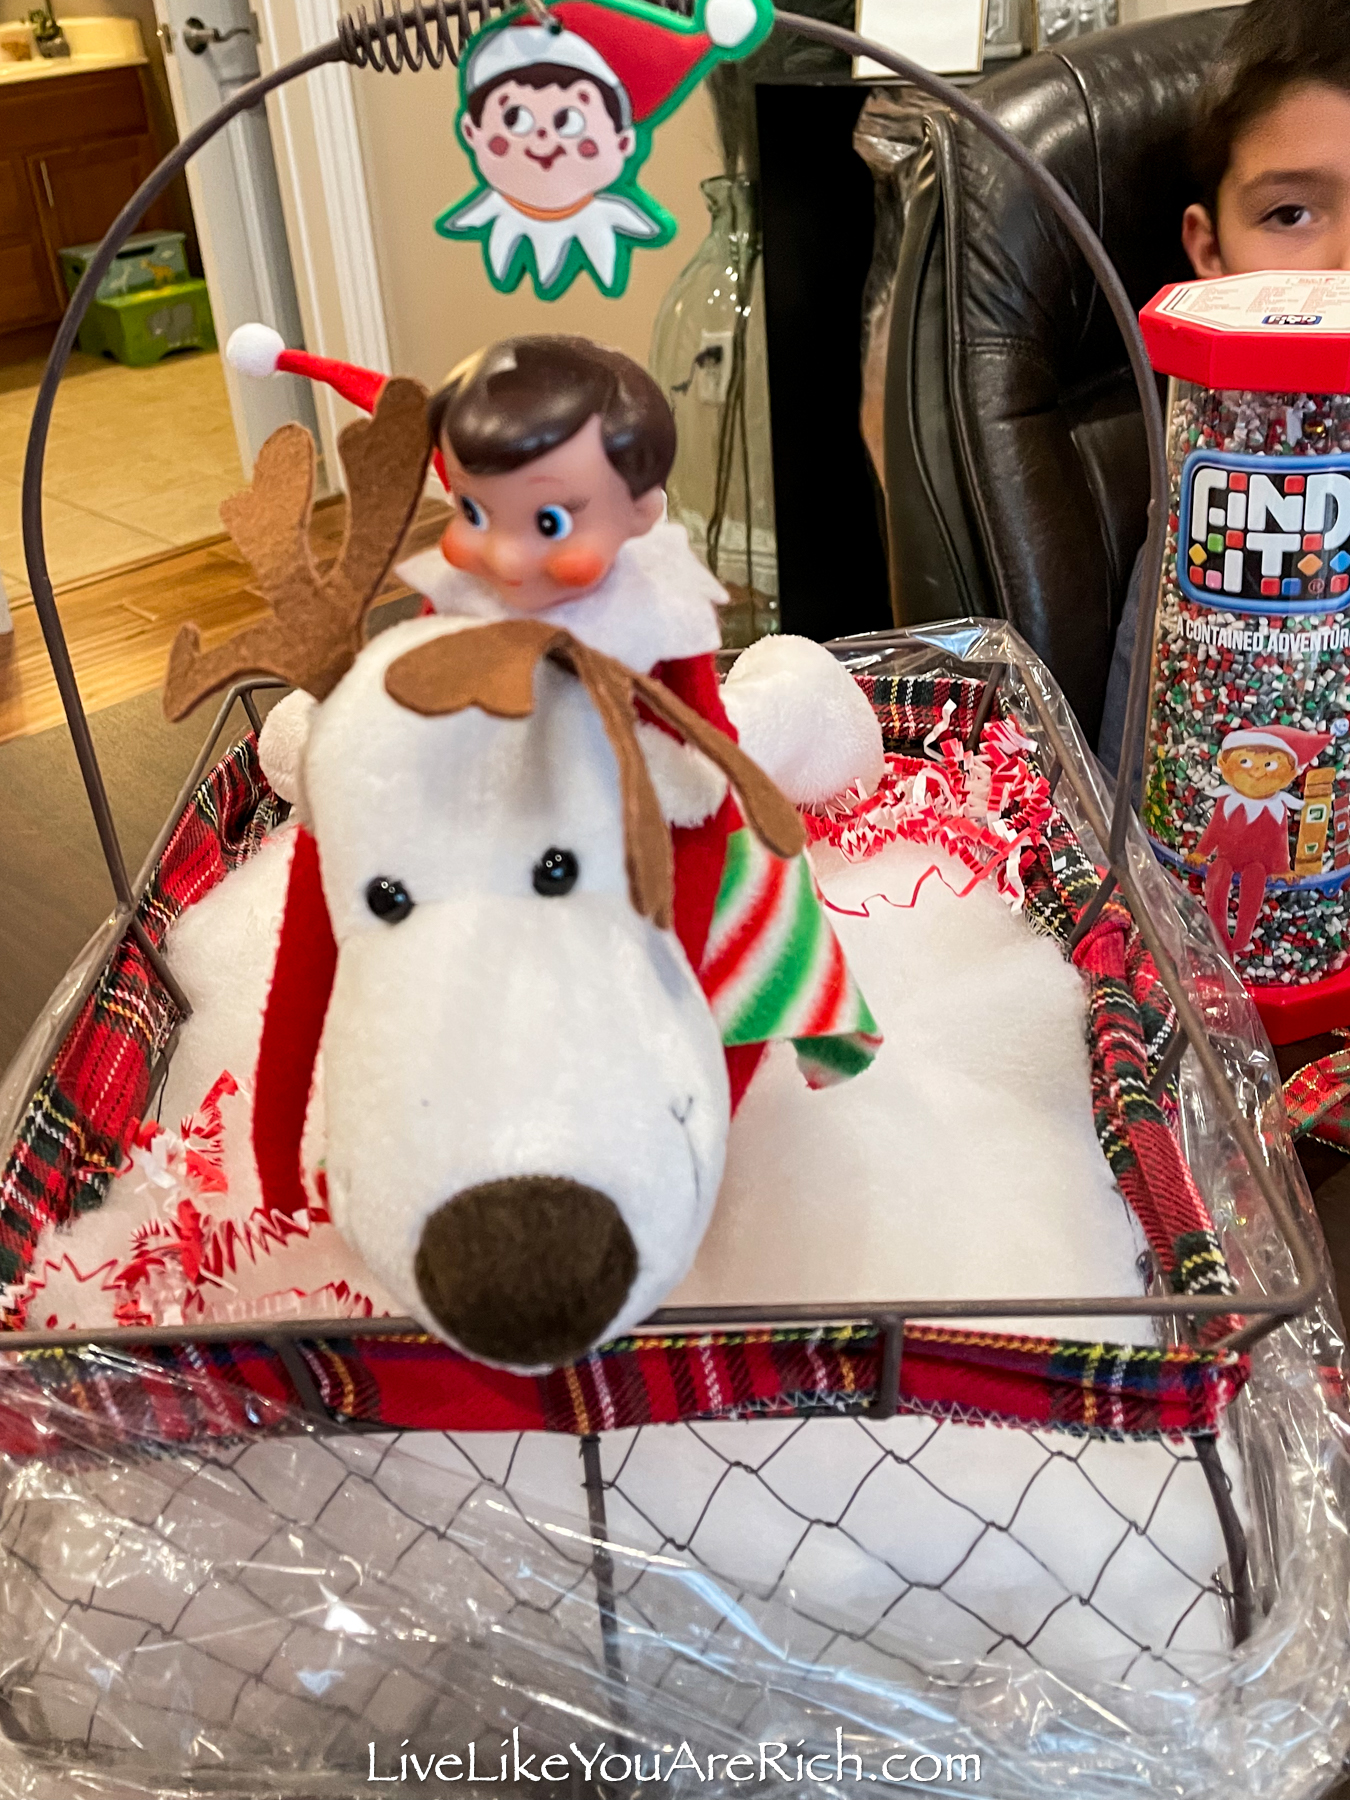 Elf on the Shelf: Do You Want to Build a Snowman? - Live Like You Are Rich